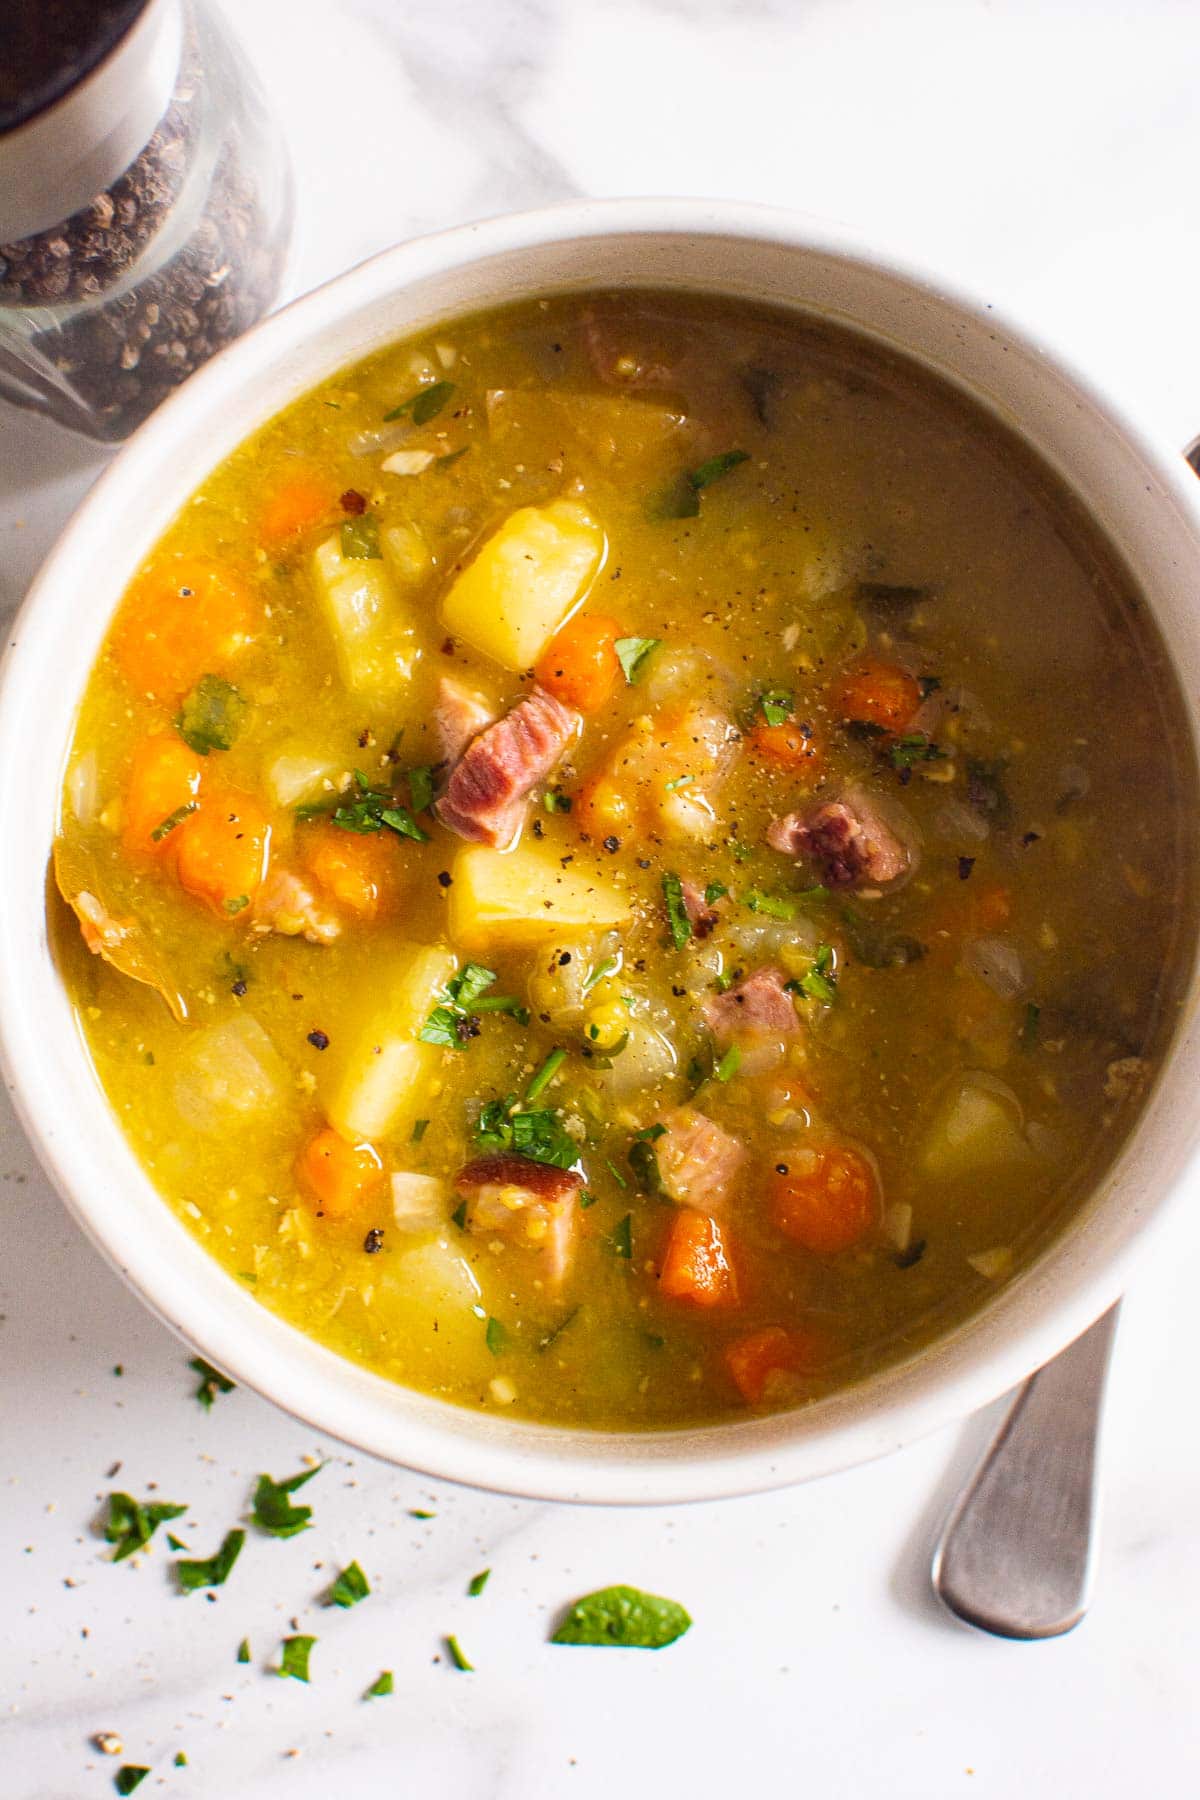 Instant Pot split pea soup with ham, vegetables and parsley served in a bowl.